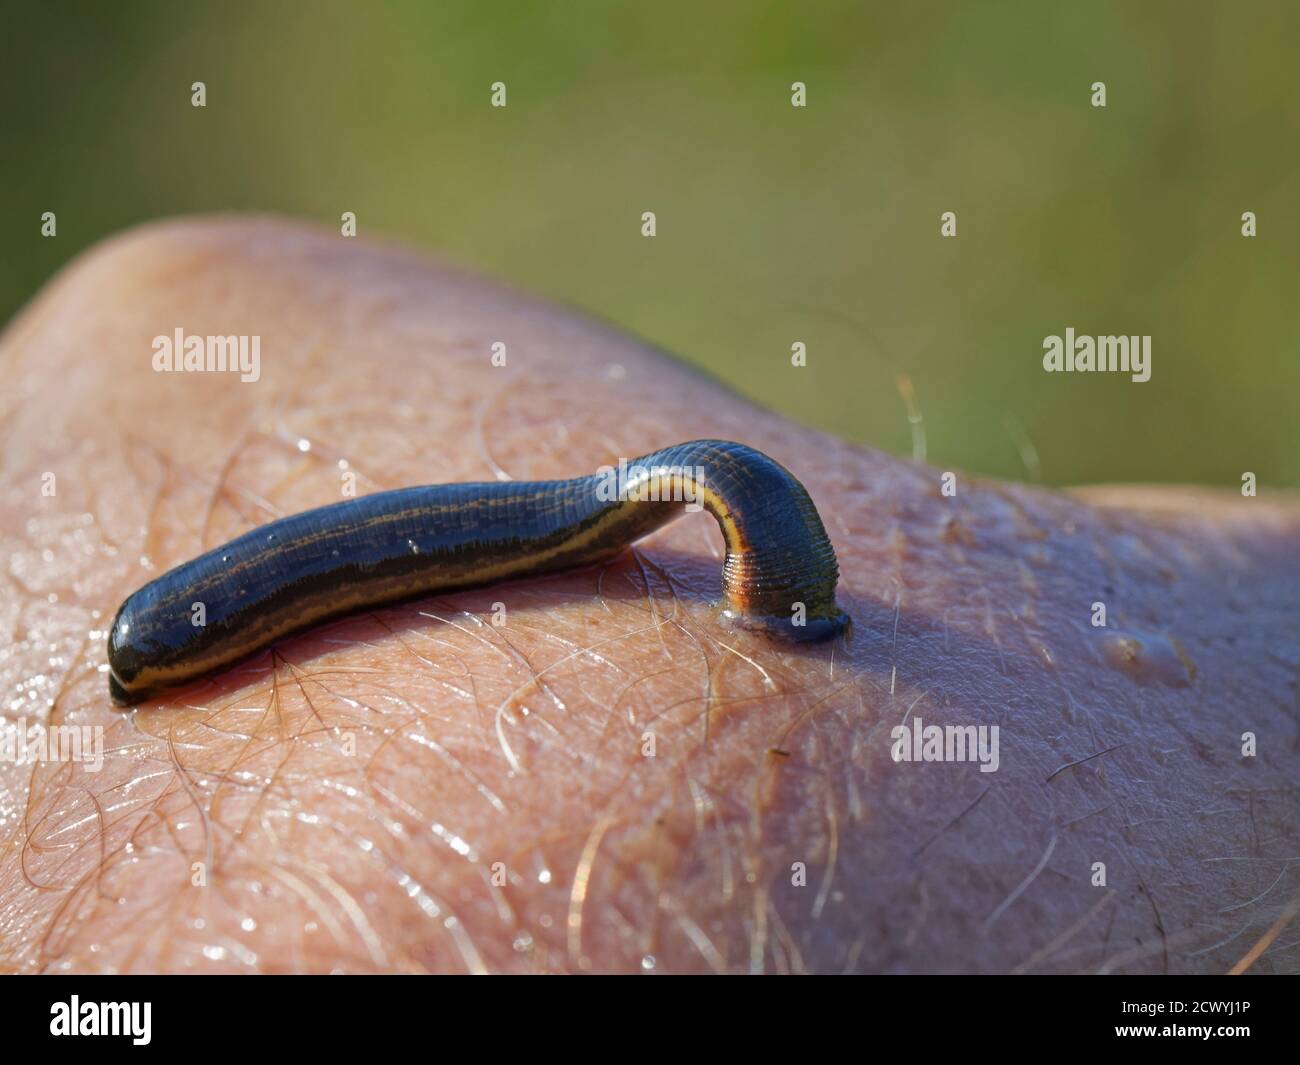 Medicinal leech (Hirudo medicinalis), a rare protected species in the UK, attached to photographer’s hand with posterior sucker, Dorset, UK, June. Stock Photo